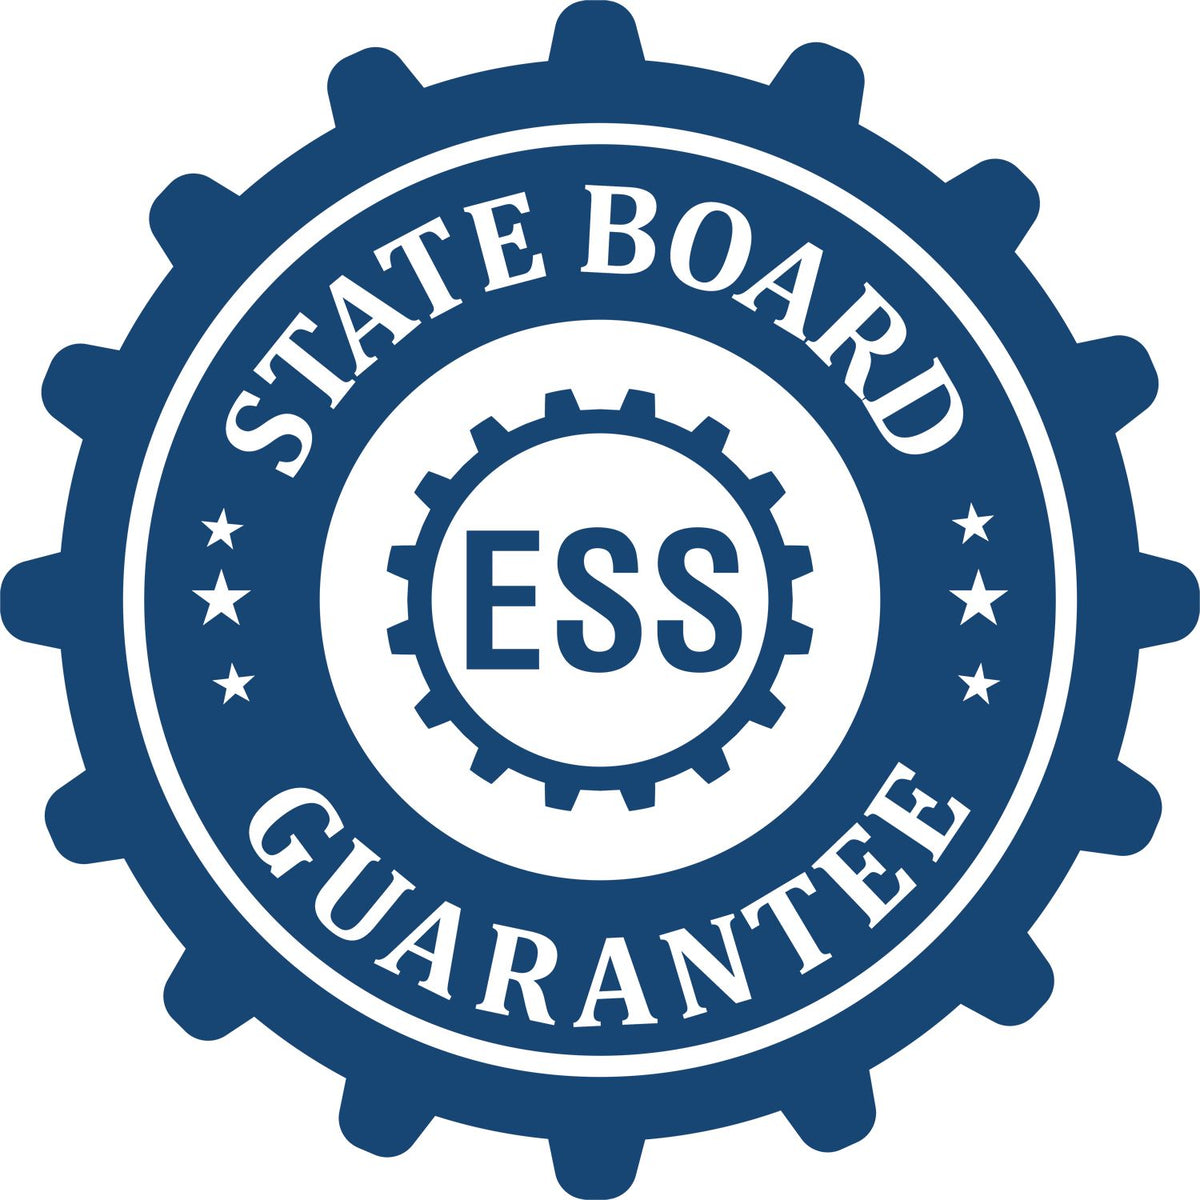 An emblem in a gear shape illustrating a state board guarantee for the Alaska Landscape Architectural Seal Stamp product.